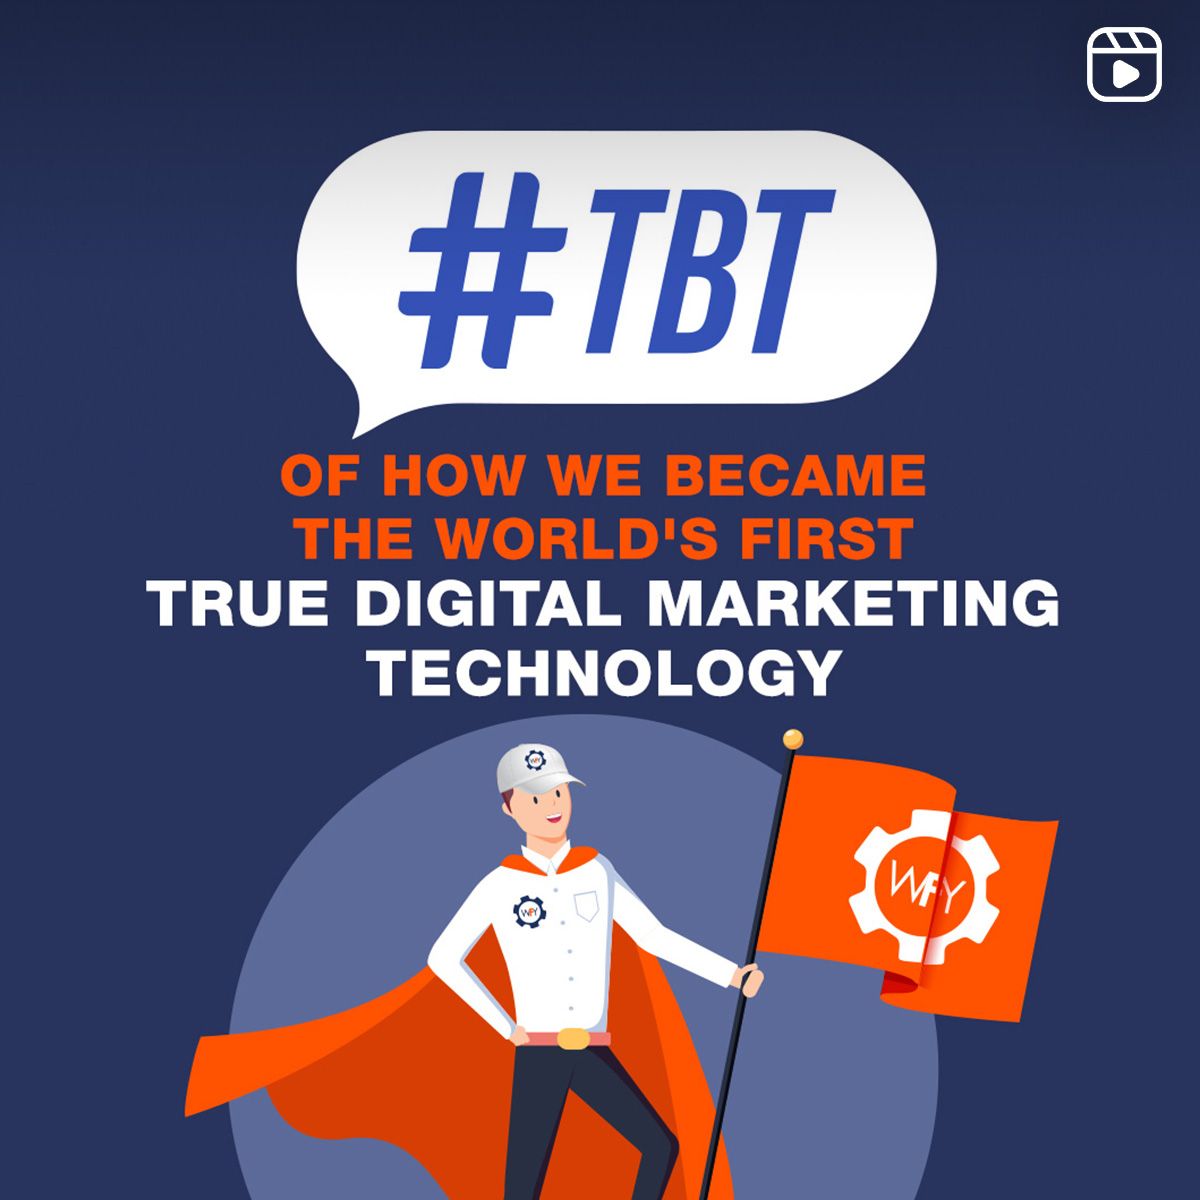 #TBT of how we became the world's first true digital marketing technology